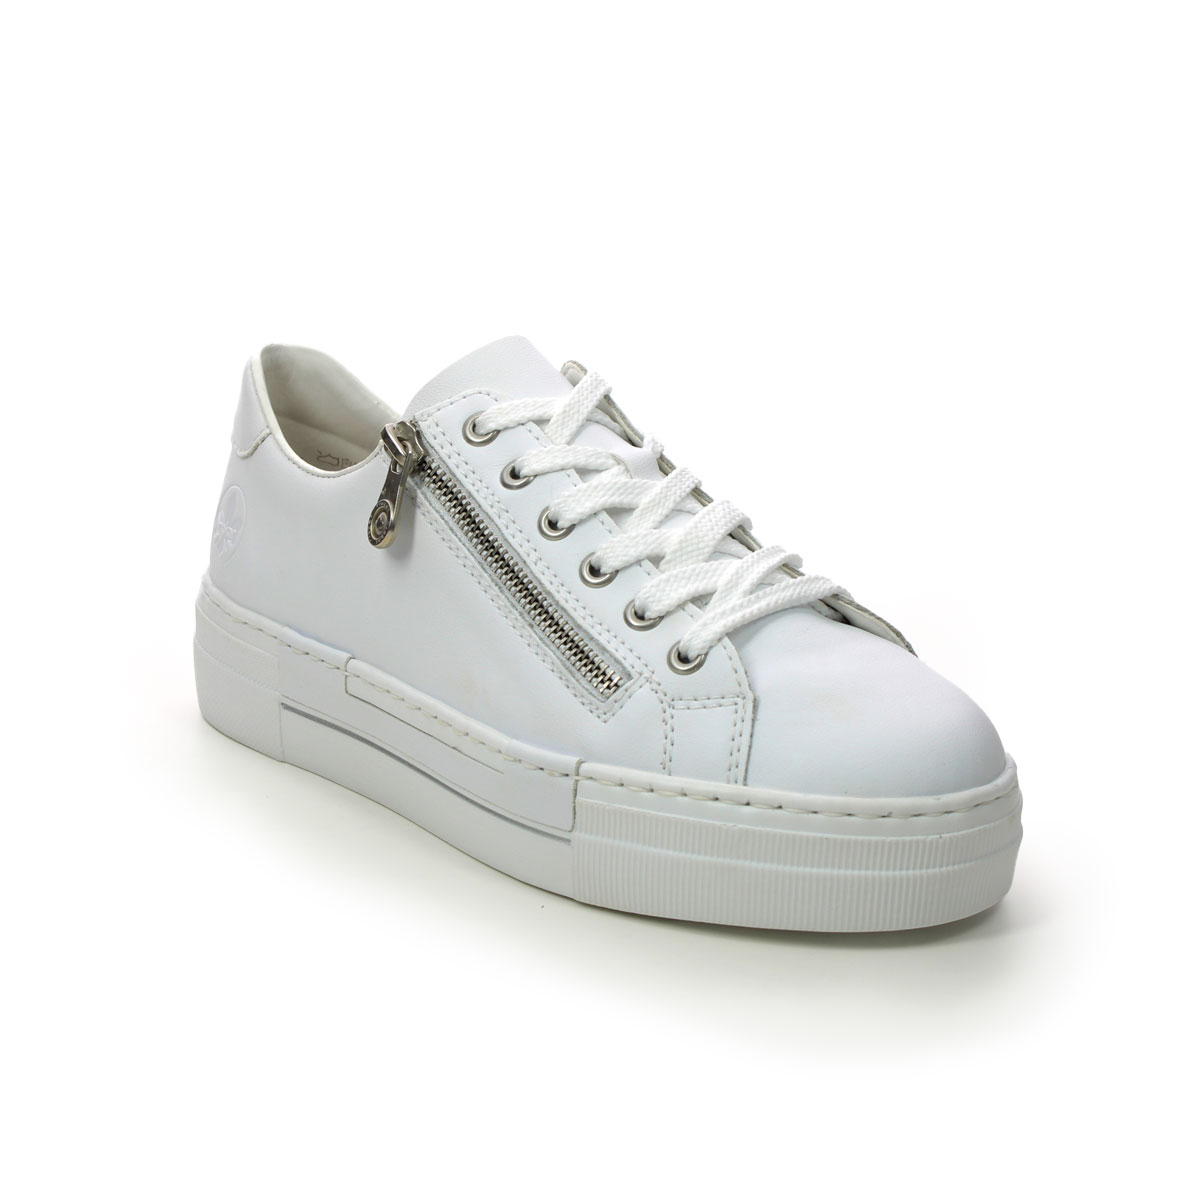 Rieker N4921-81 WHITE LEATHER Womens trainers in a Plain Leather in Size 37